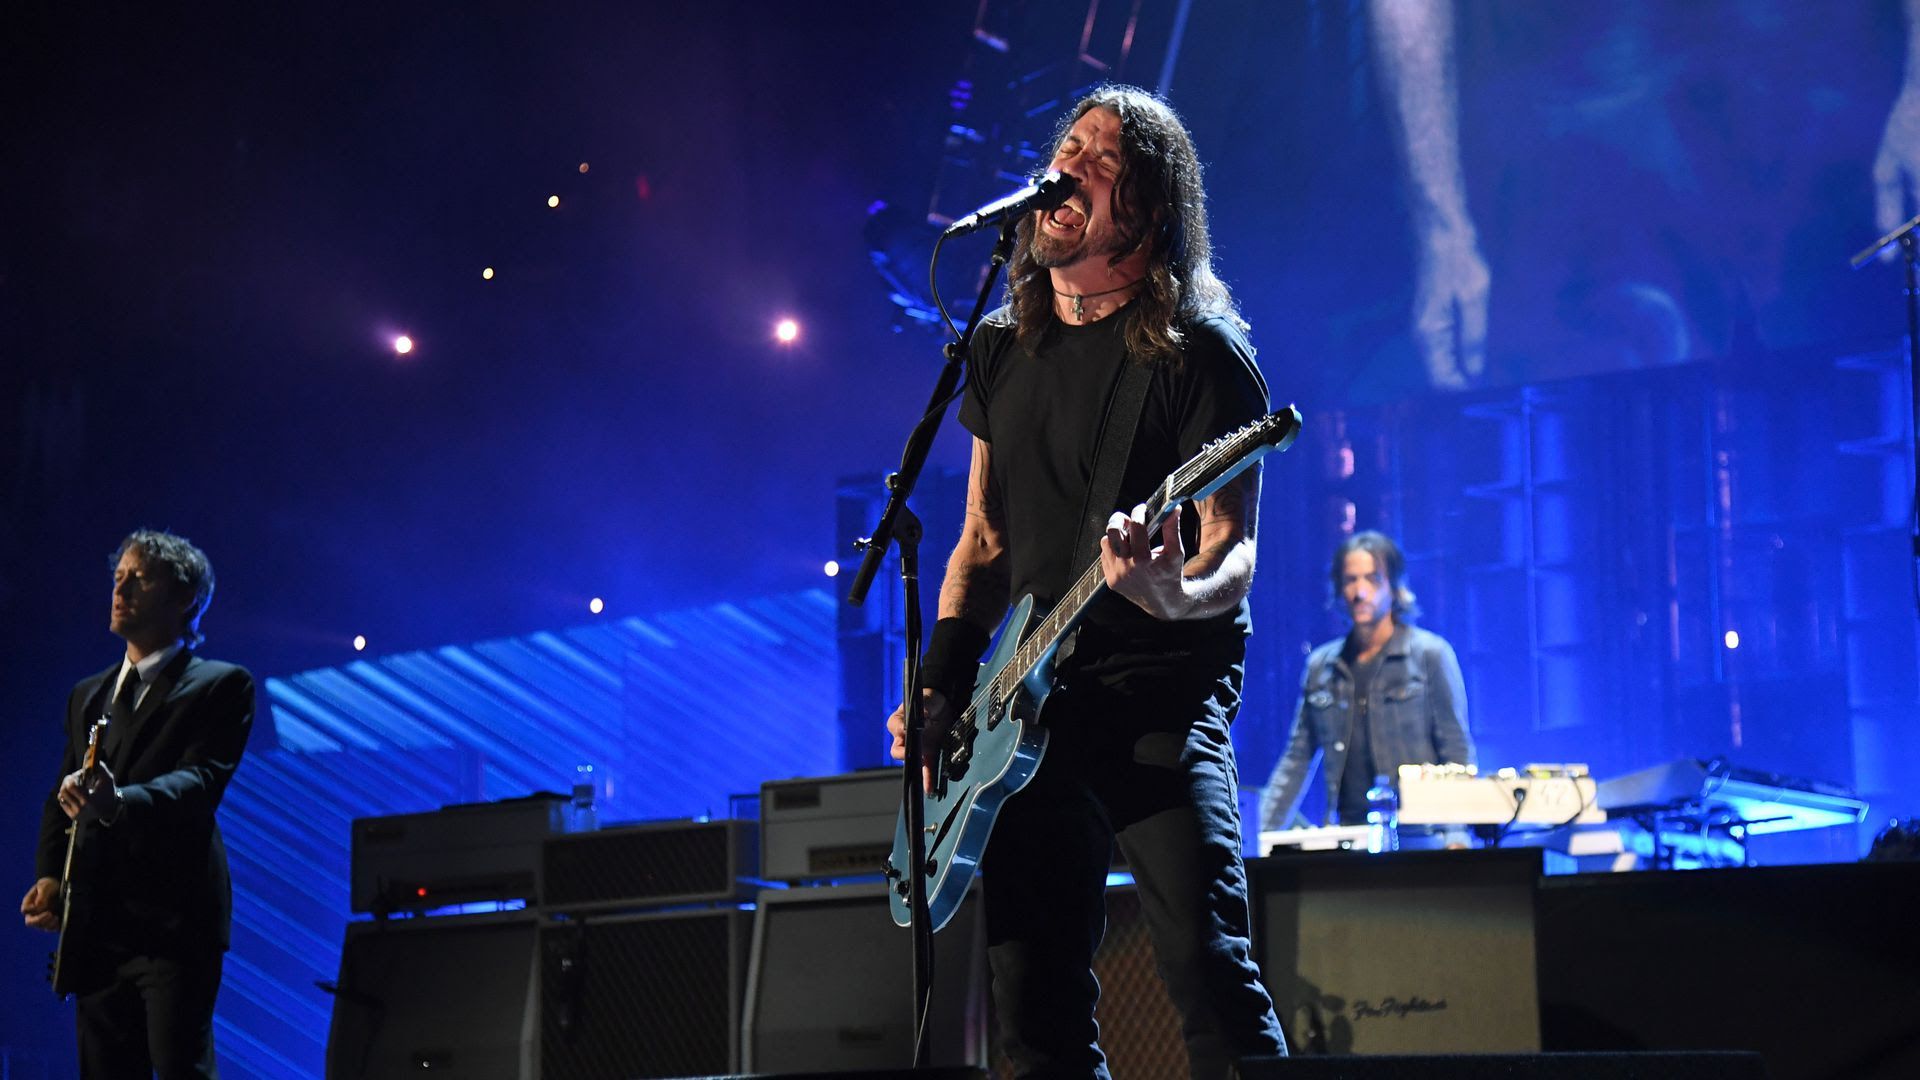 Dave Grohl of the Foo Fighters sings into the mic on stage.